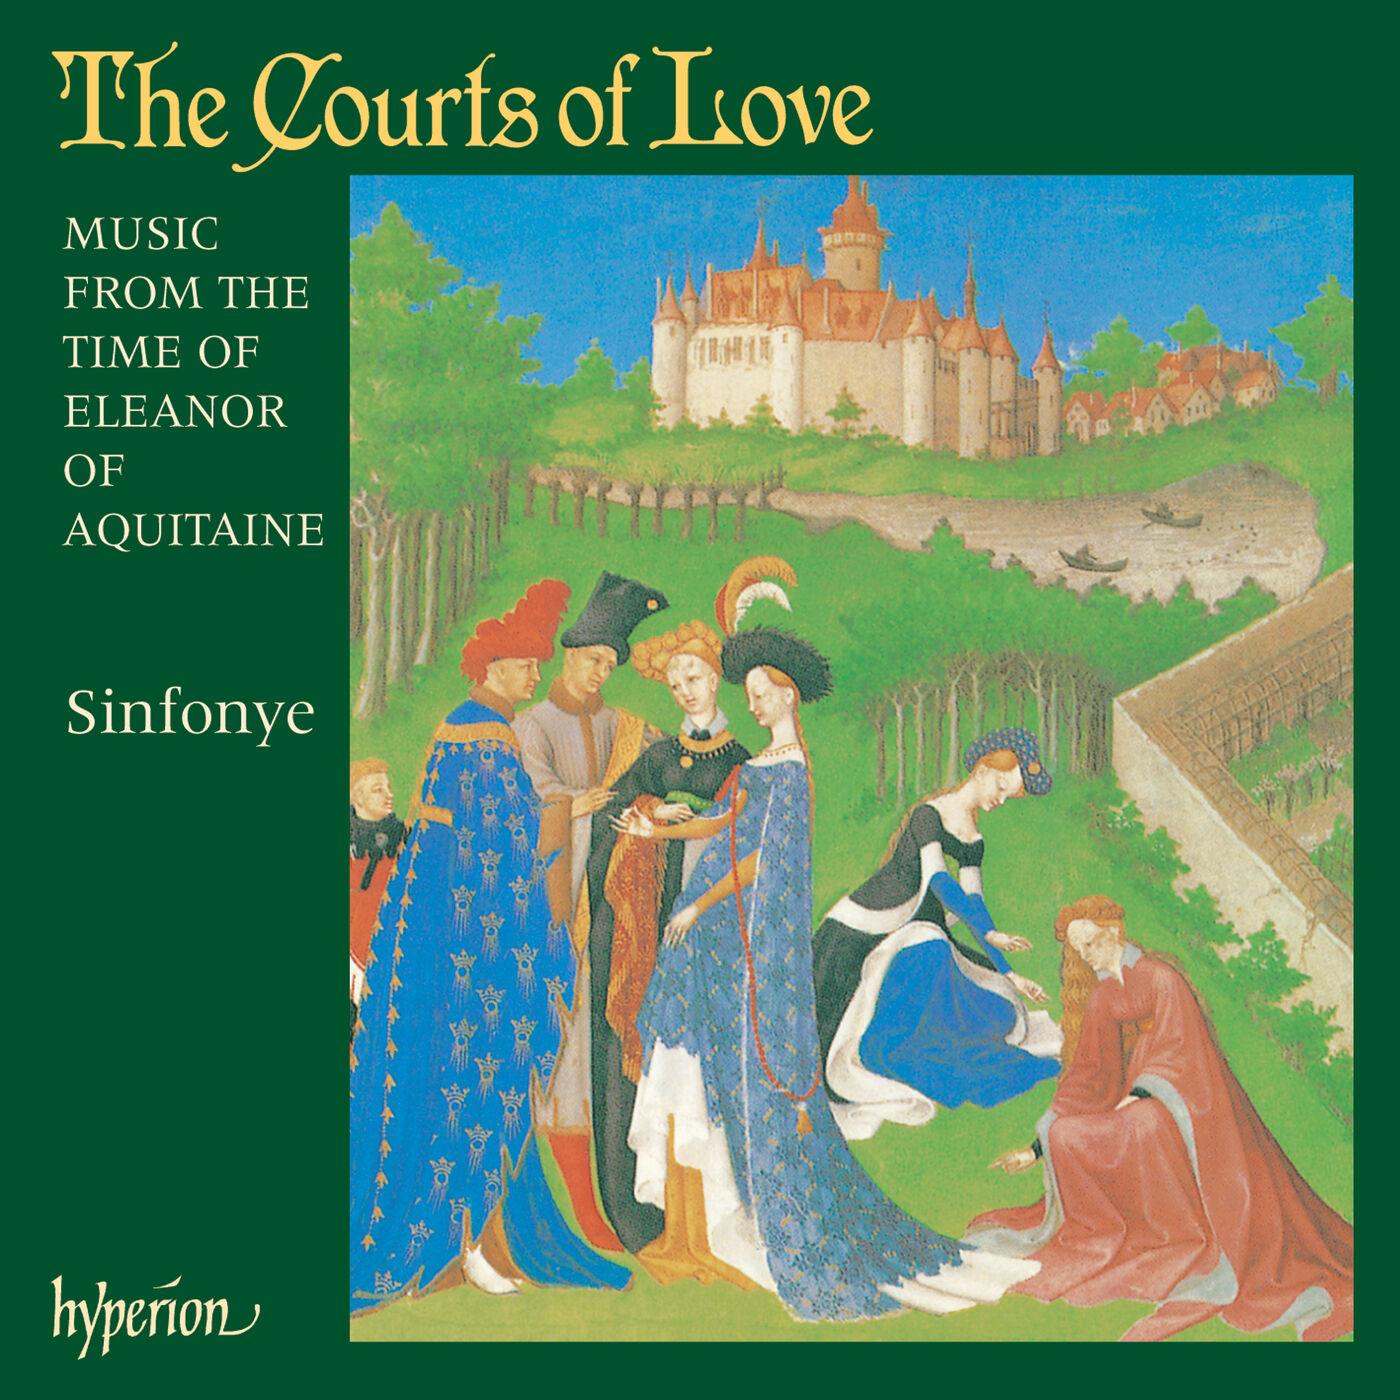 Ens. Sinfonye - The Courts of Love - Music from the Time of Eleanor of Aquitaine